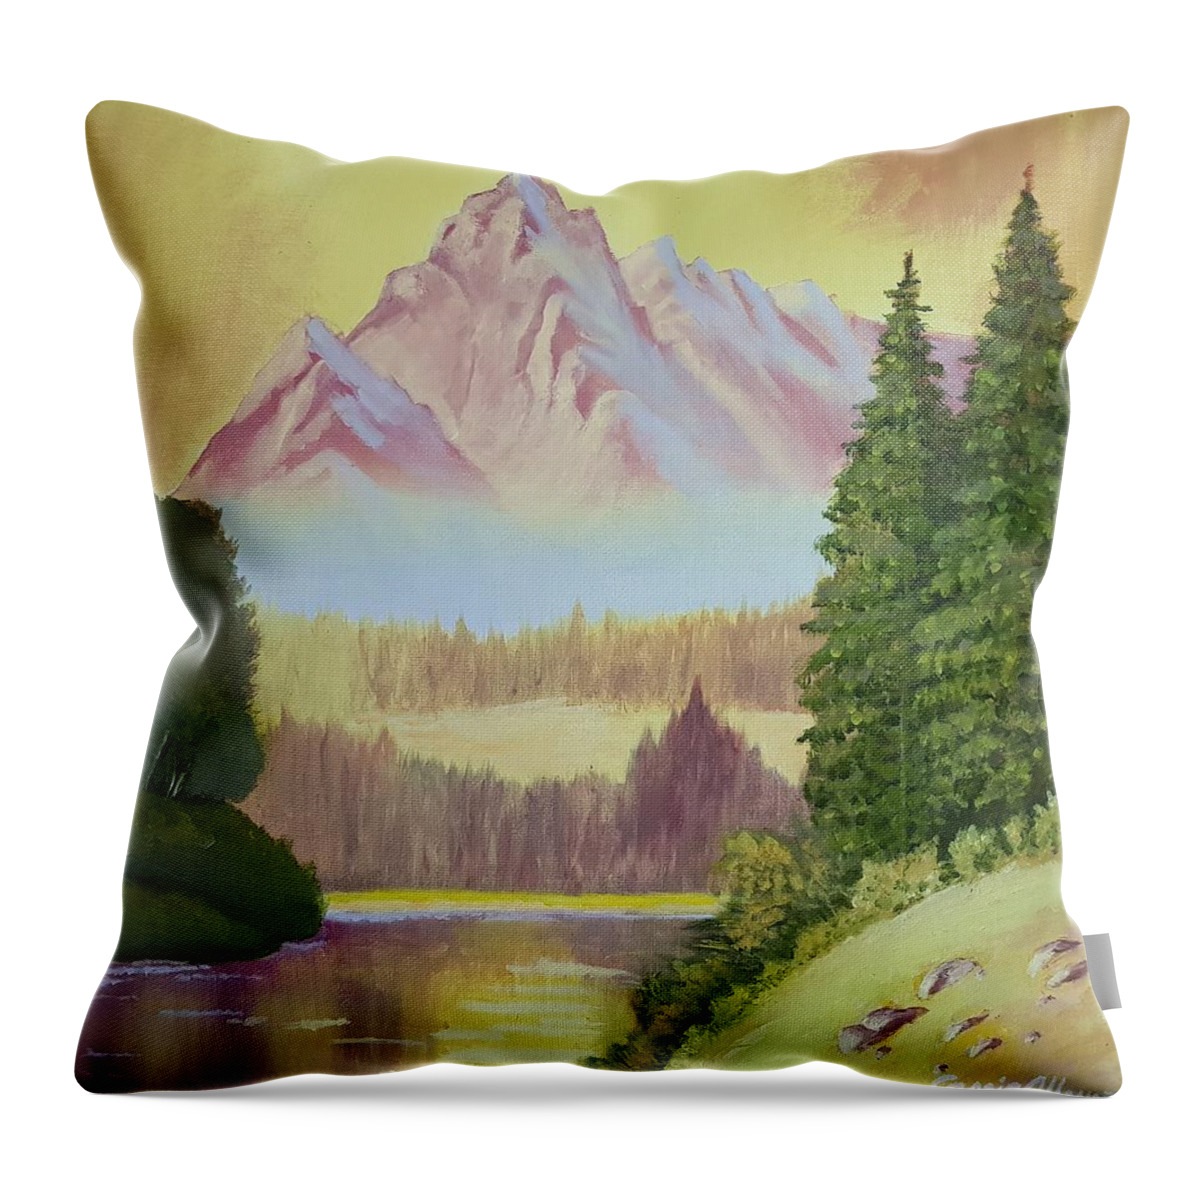 Landscape Throw Pillow featuring the painting Warm Mountain by Cassy Allsworth